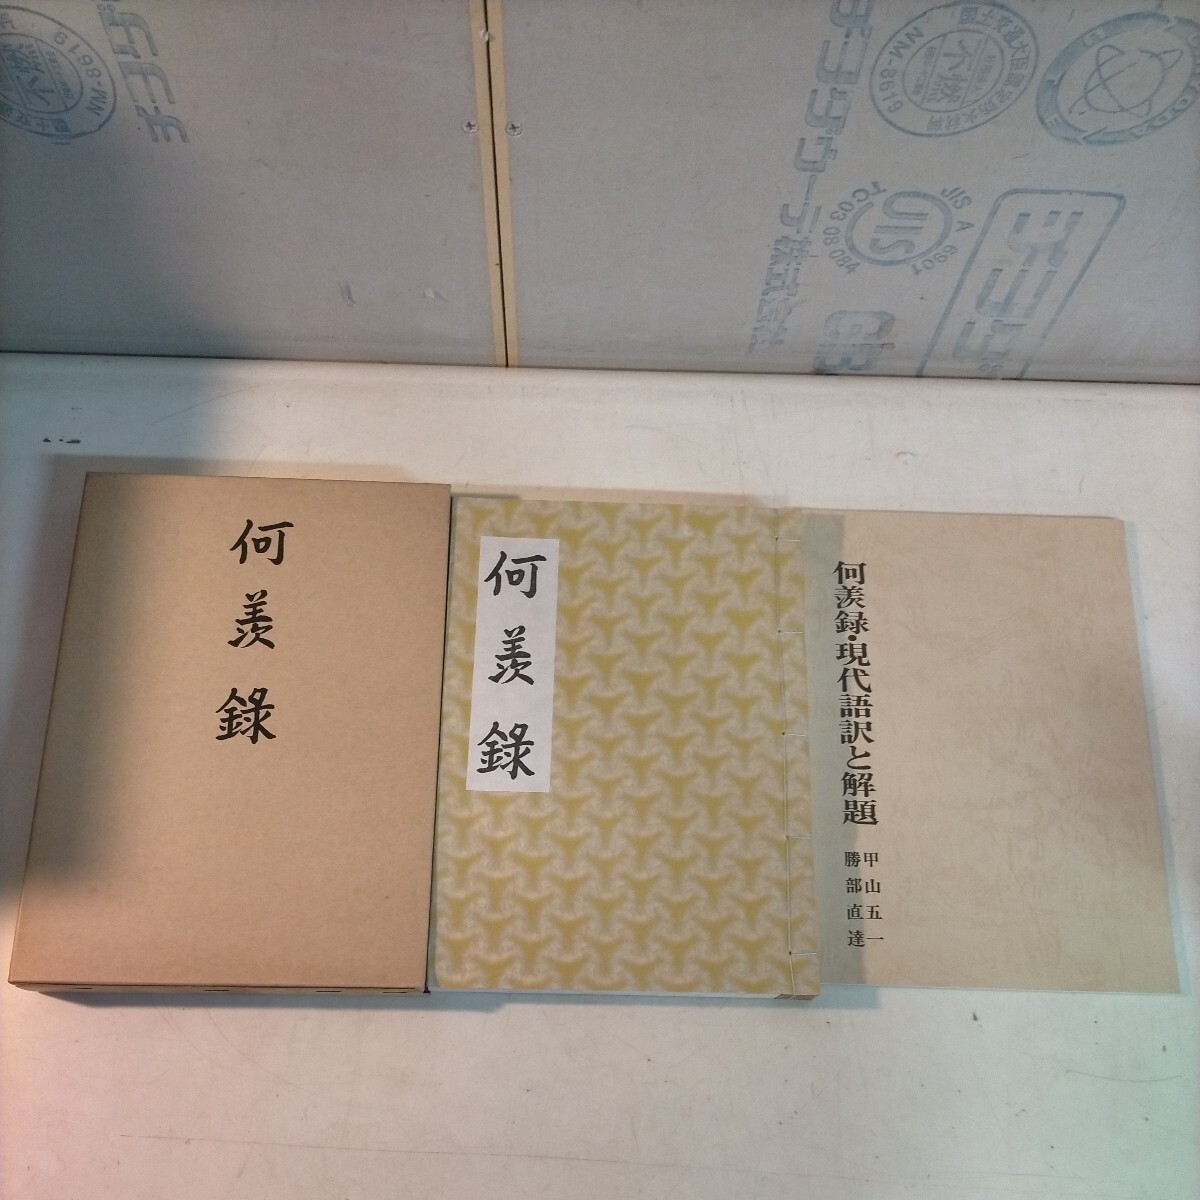  what . record ( reissue ) Tsu light . woman Nakamura profit . Showa era 56 year fishing culture association separate volume present-day language translation ...* secondhand book / attrition scorch dirty some stains /. scratch / photograph . please verify /NCNR